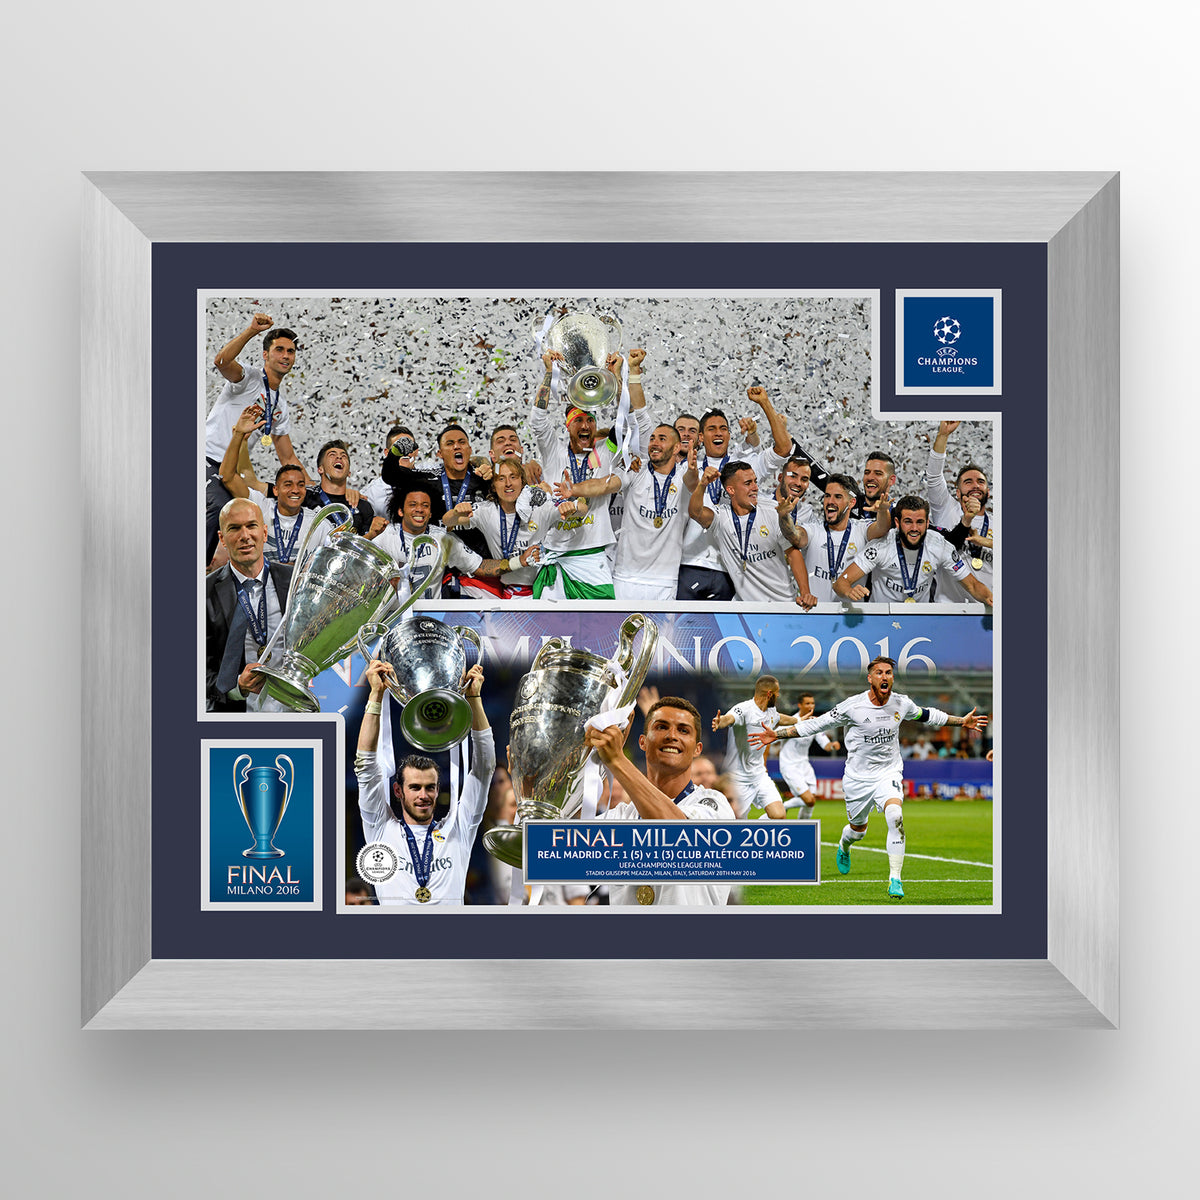 UEFA Champions League 2016 Final - WInner: Real Madrid - Trophy Lift - Silver Frame UEFA Club Competitions Online Store